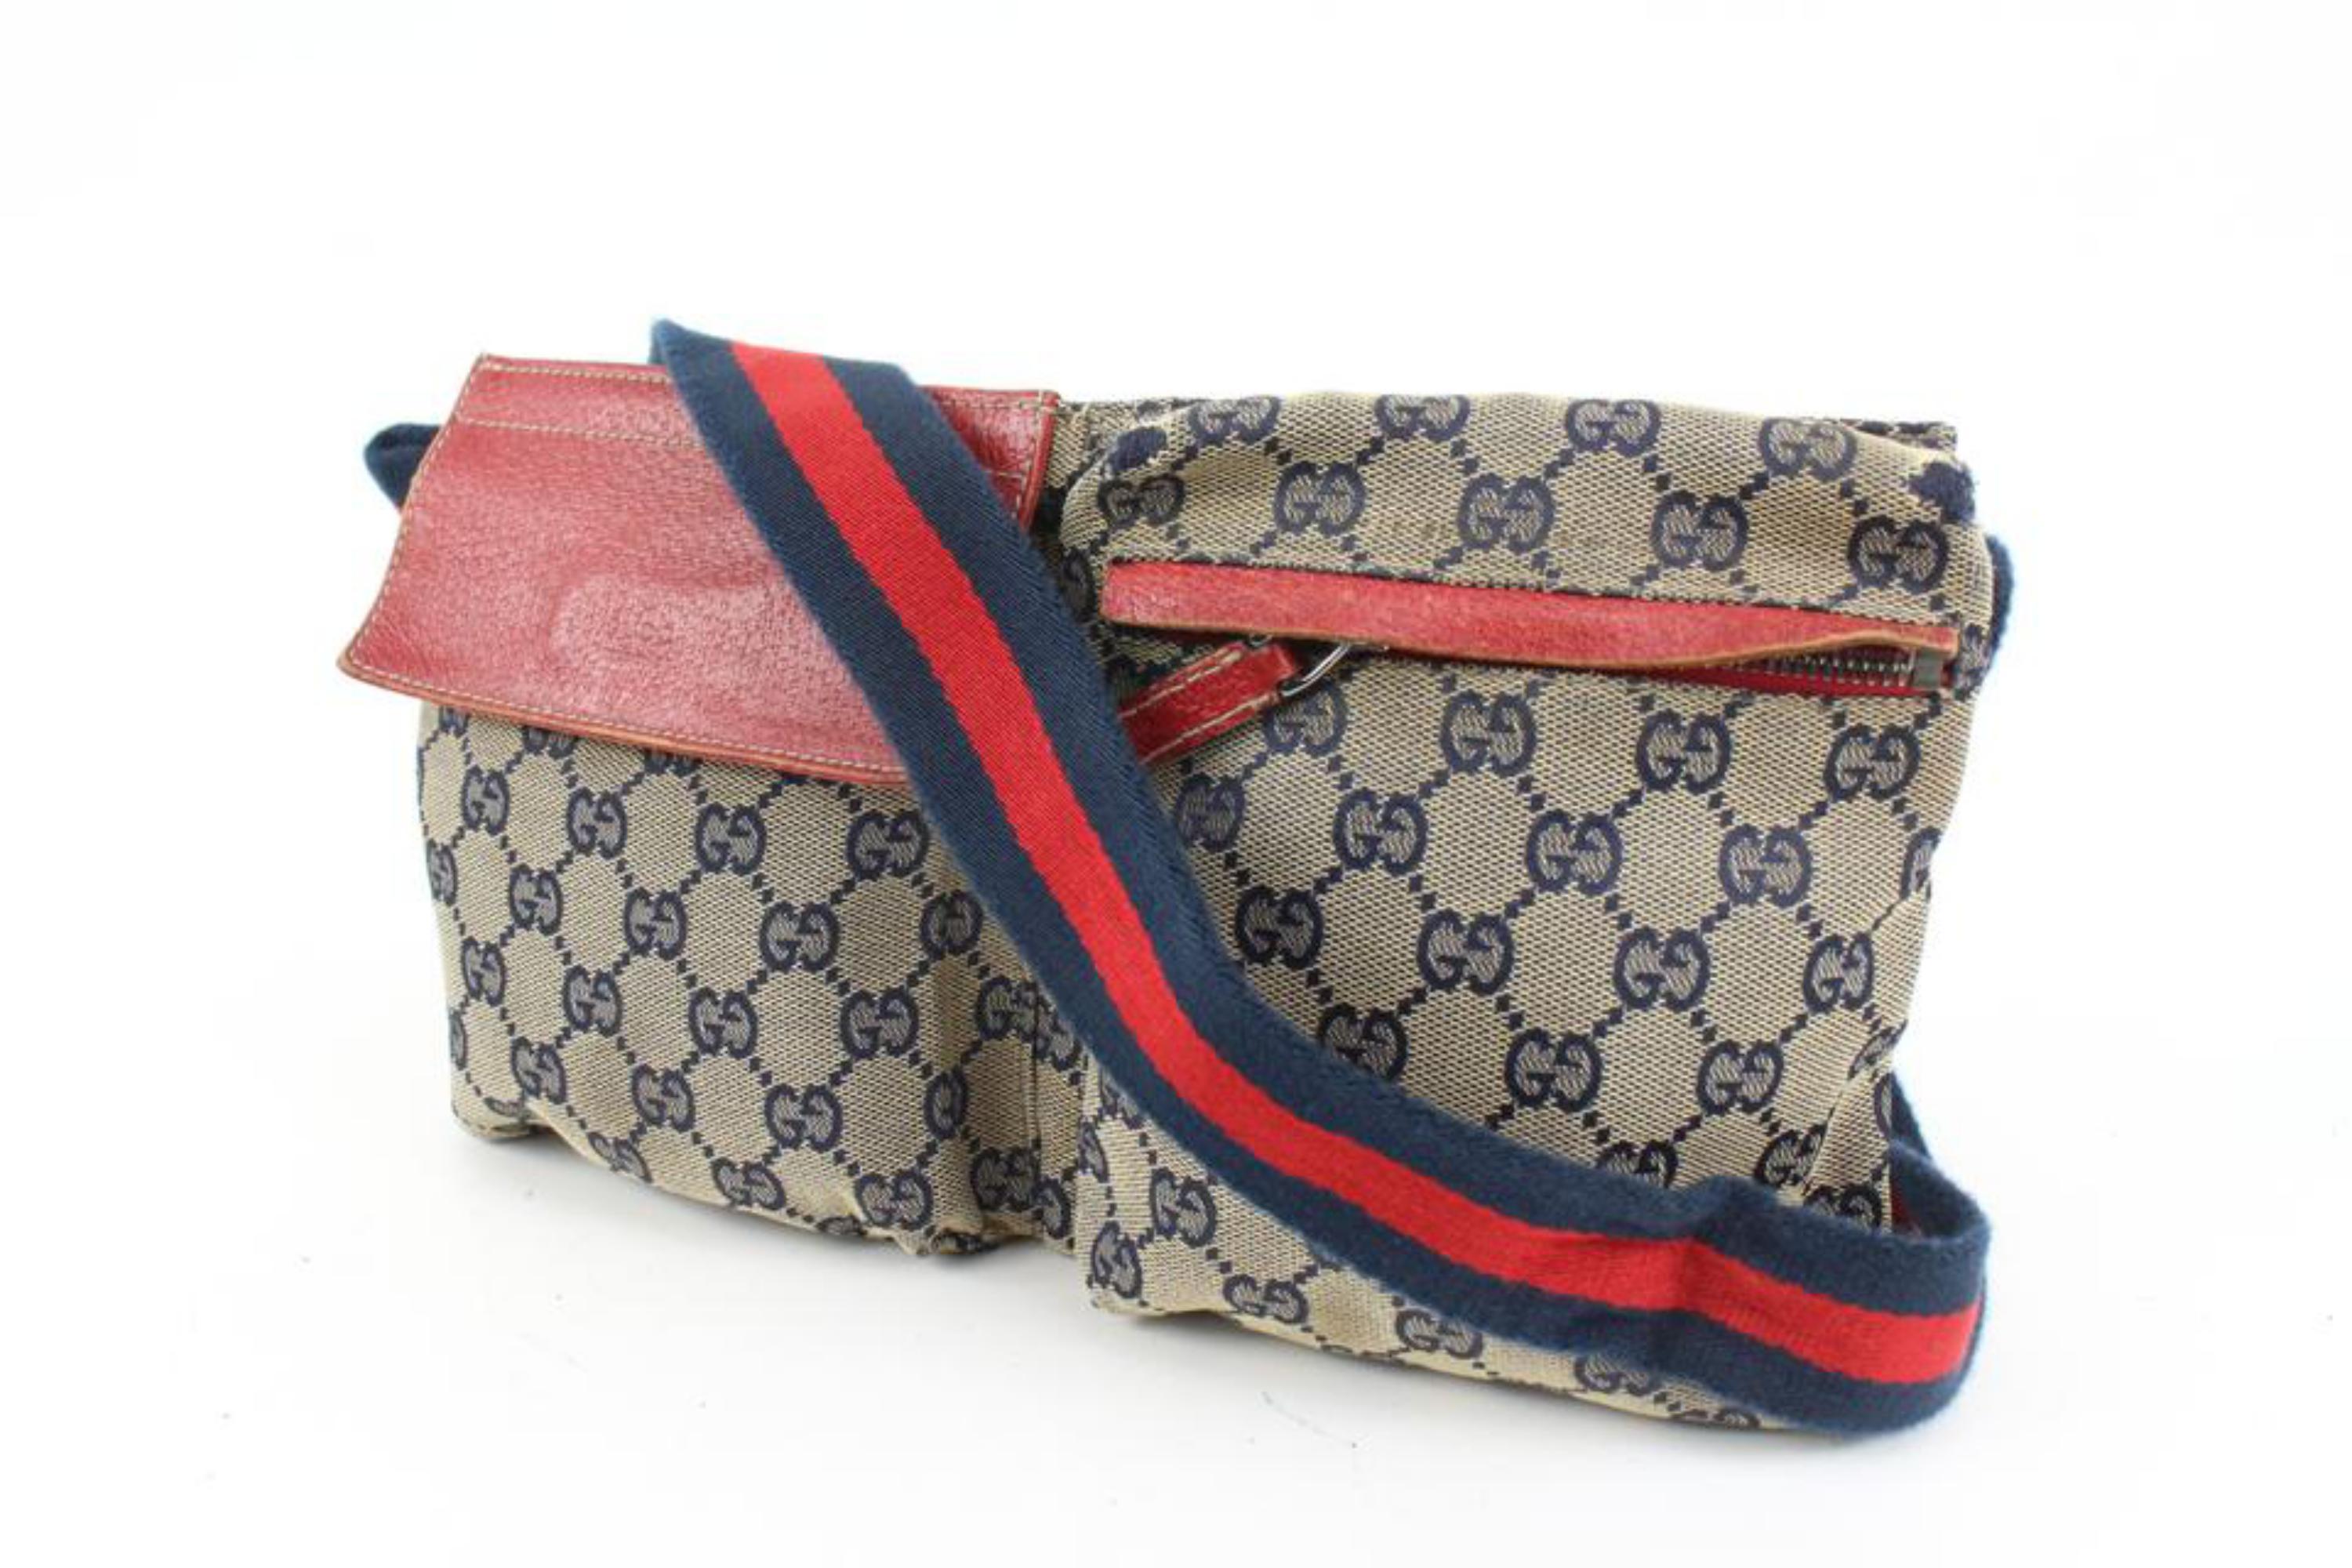 Gucci Red x Navy Monogram GG Belt Bag Waist Pouch Fanny Pack 30g420s
Date Code/Serial Number: 28566 200047
Made In: Italy
Measurements: Length:  12